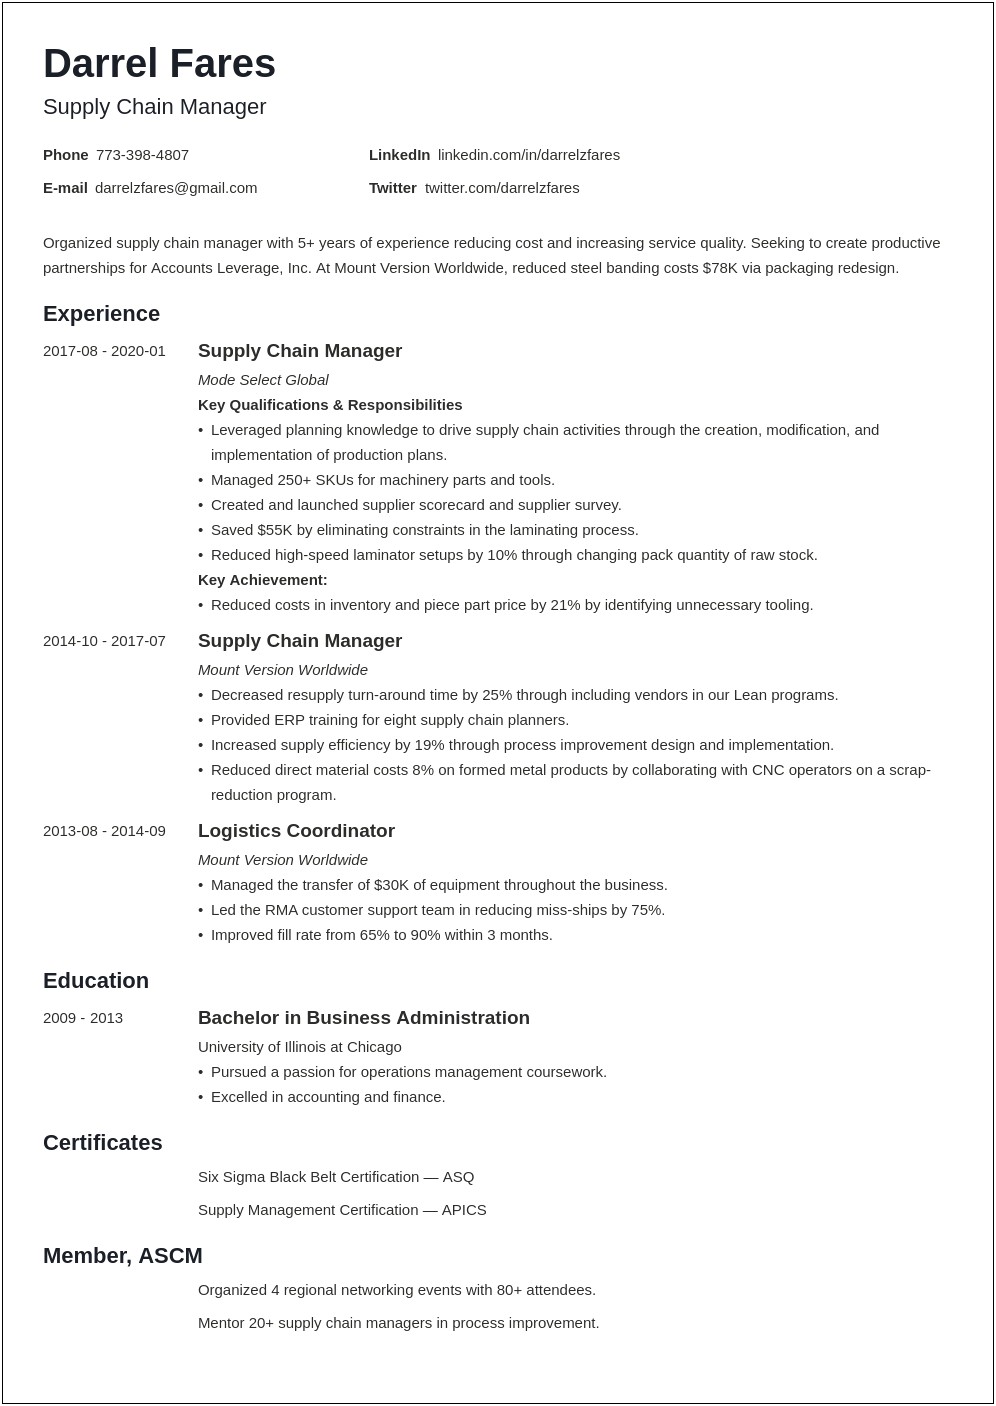 Logistics And Supply Chain Manager Resume Samples